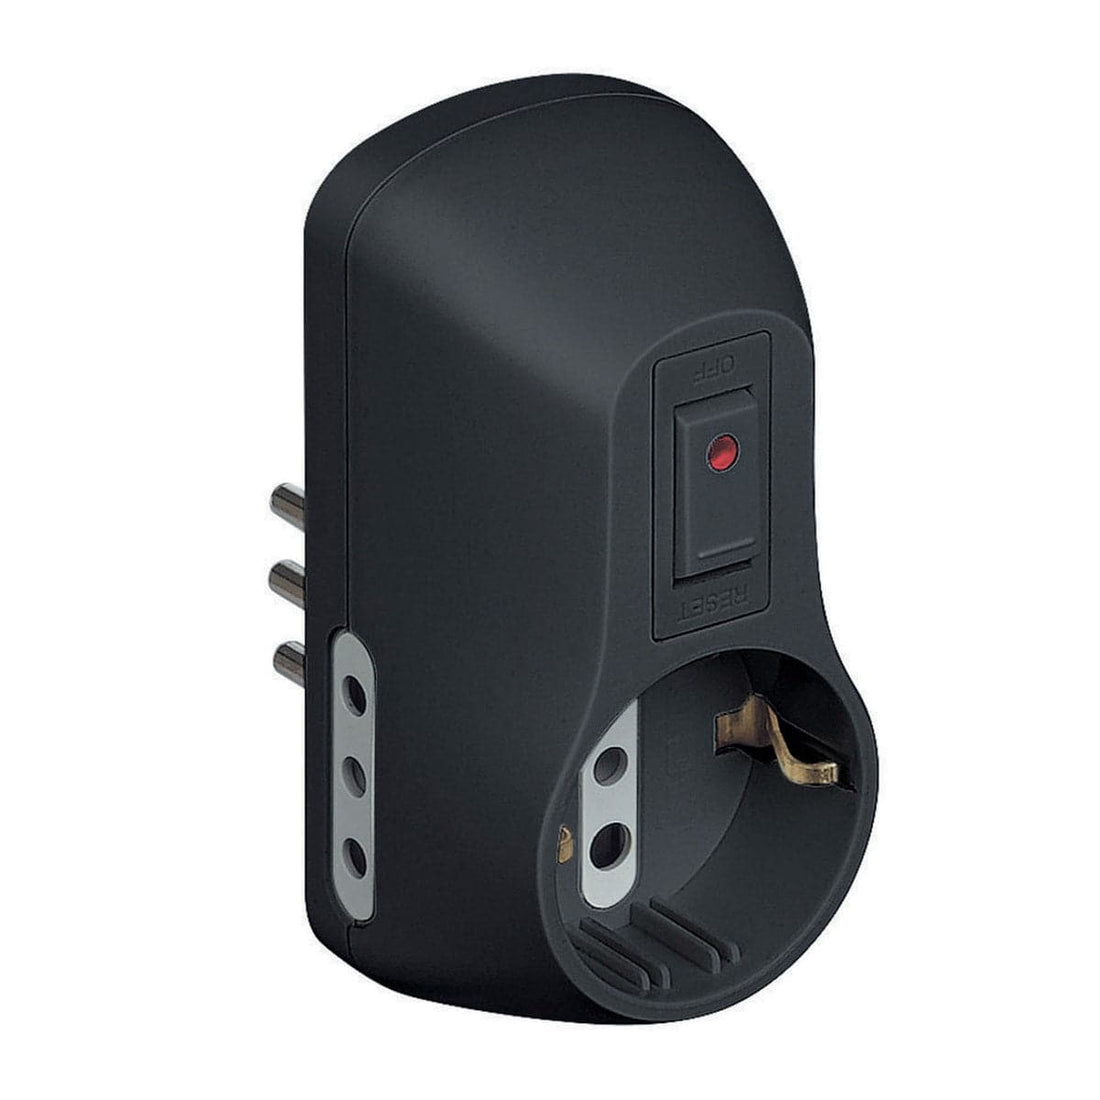 ADAPTER PLUG 10A 1 UNIVERSAL 2 10A WITH SWITCH GREY - best price from Maltashopper.com BR420003200